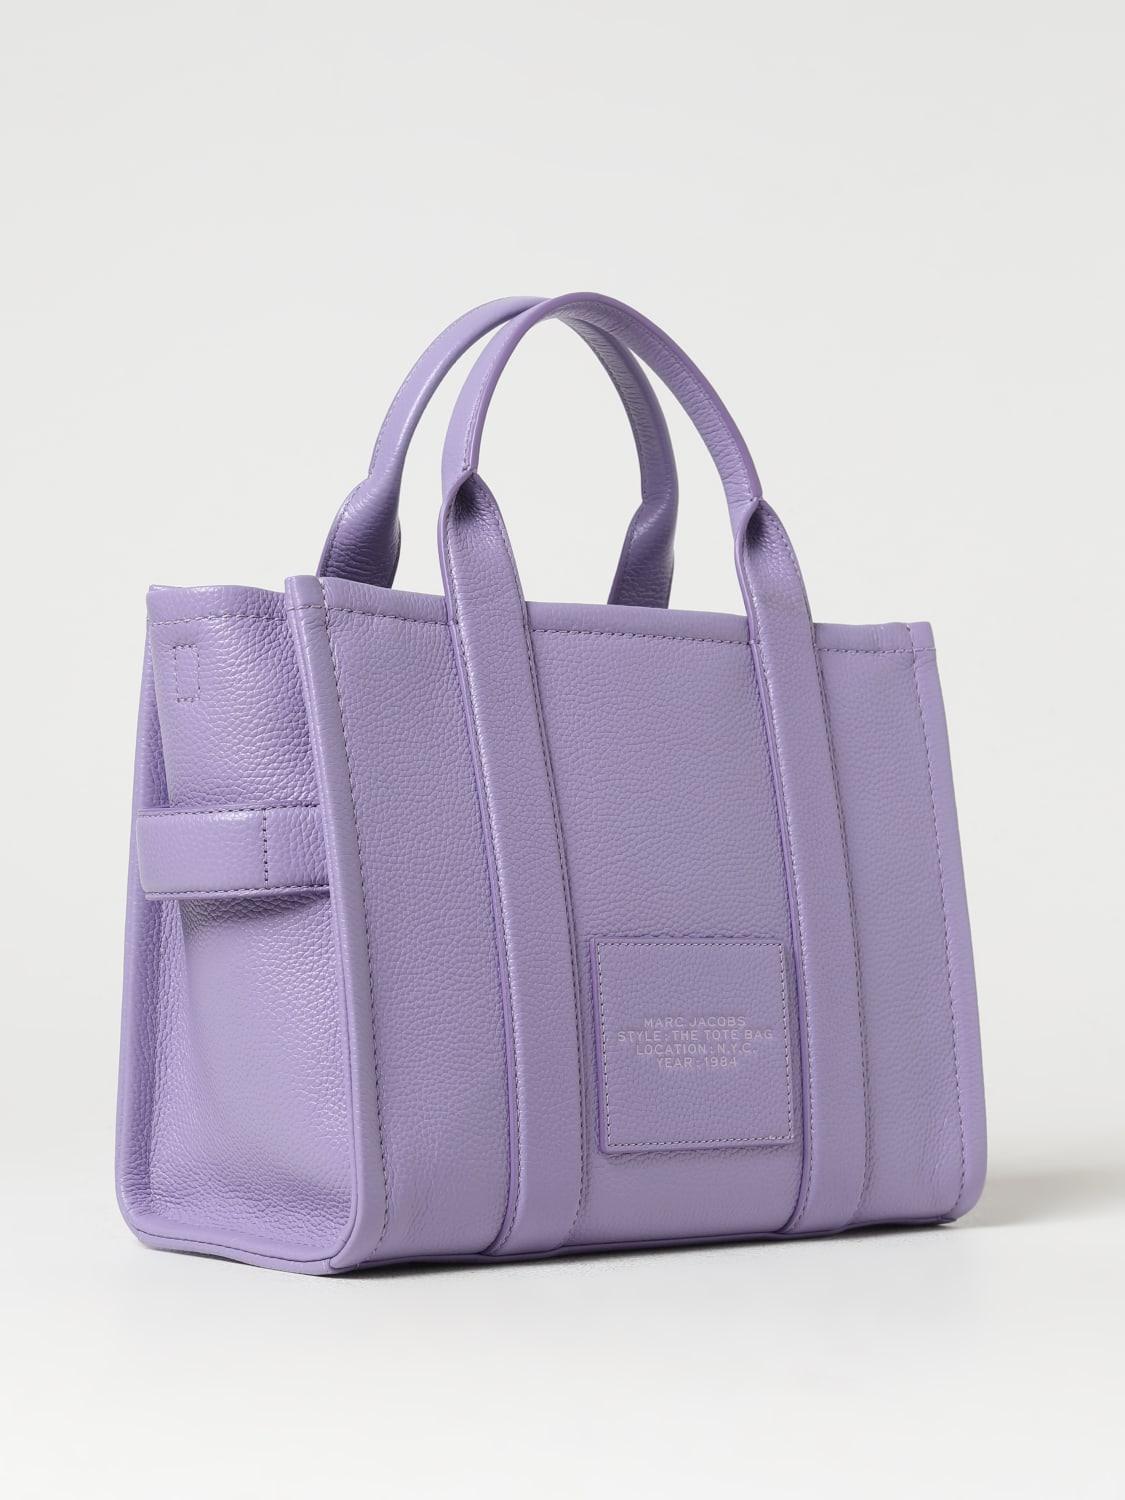 Marc Jacobs Woman's Tote Bag